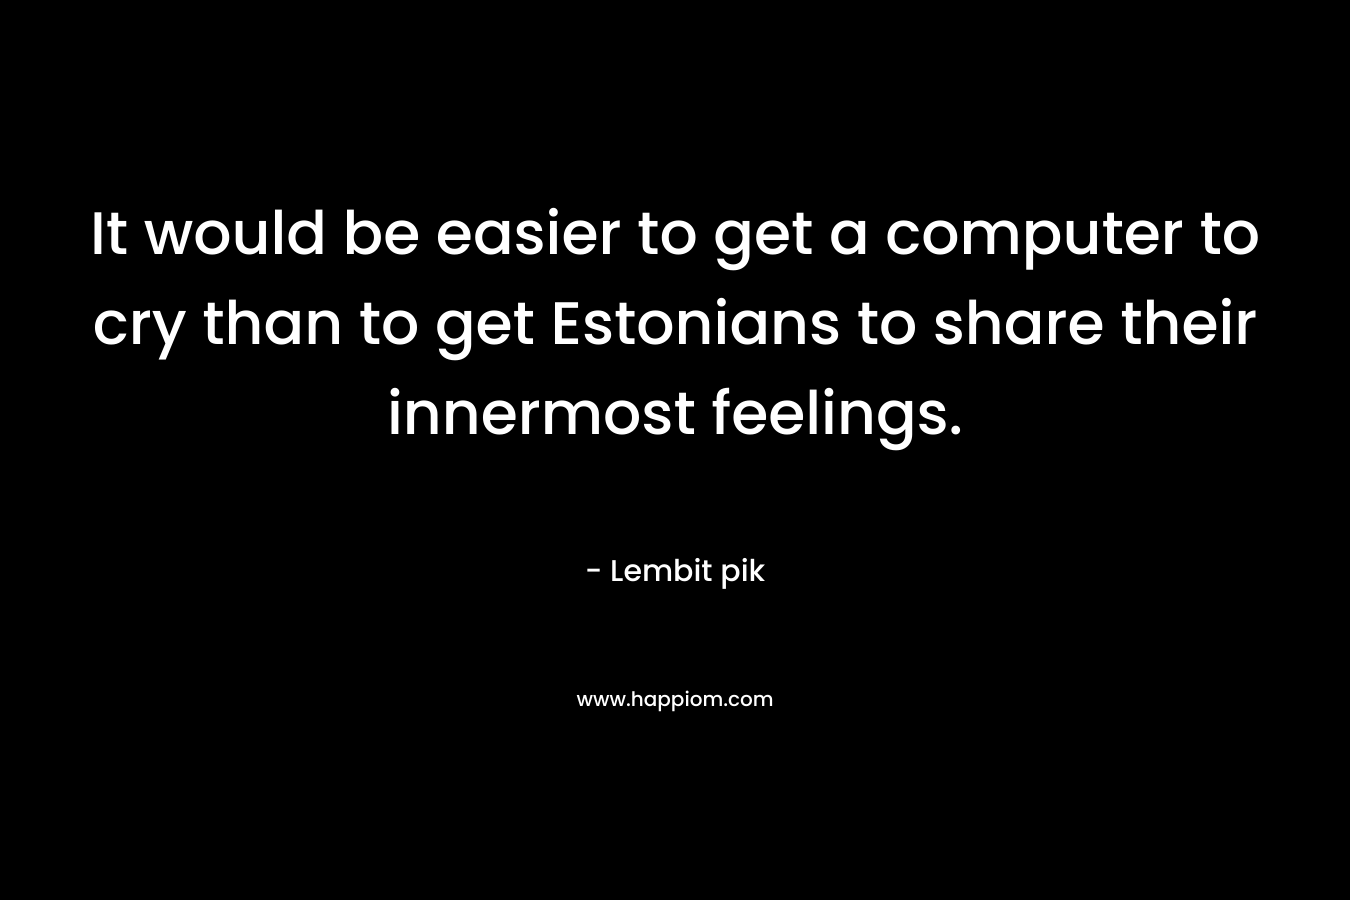 It would be easier to get a computer to cry than to get Estonians to share their innermost feelings.